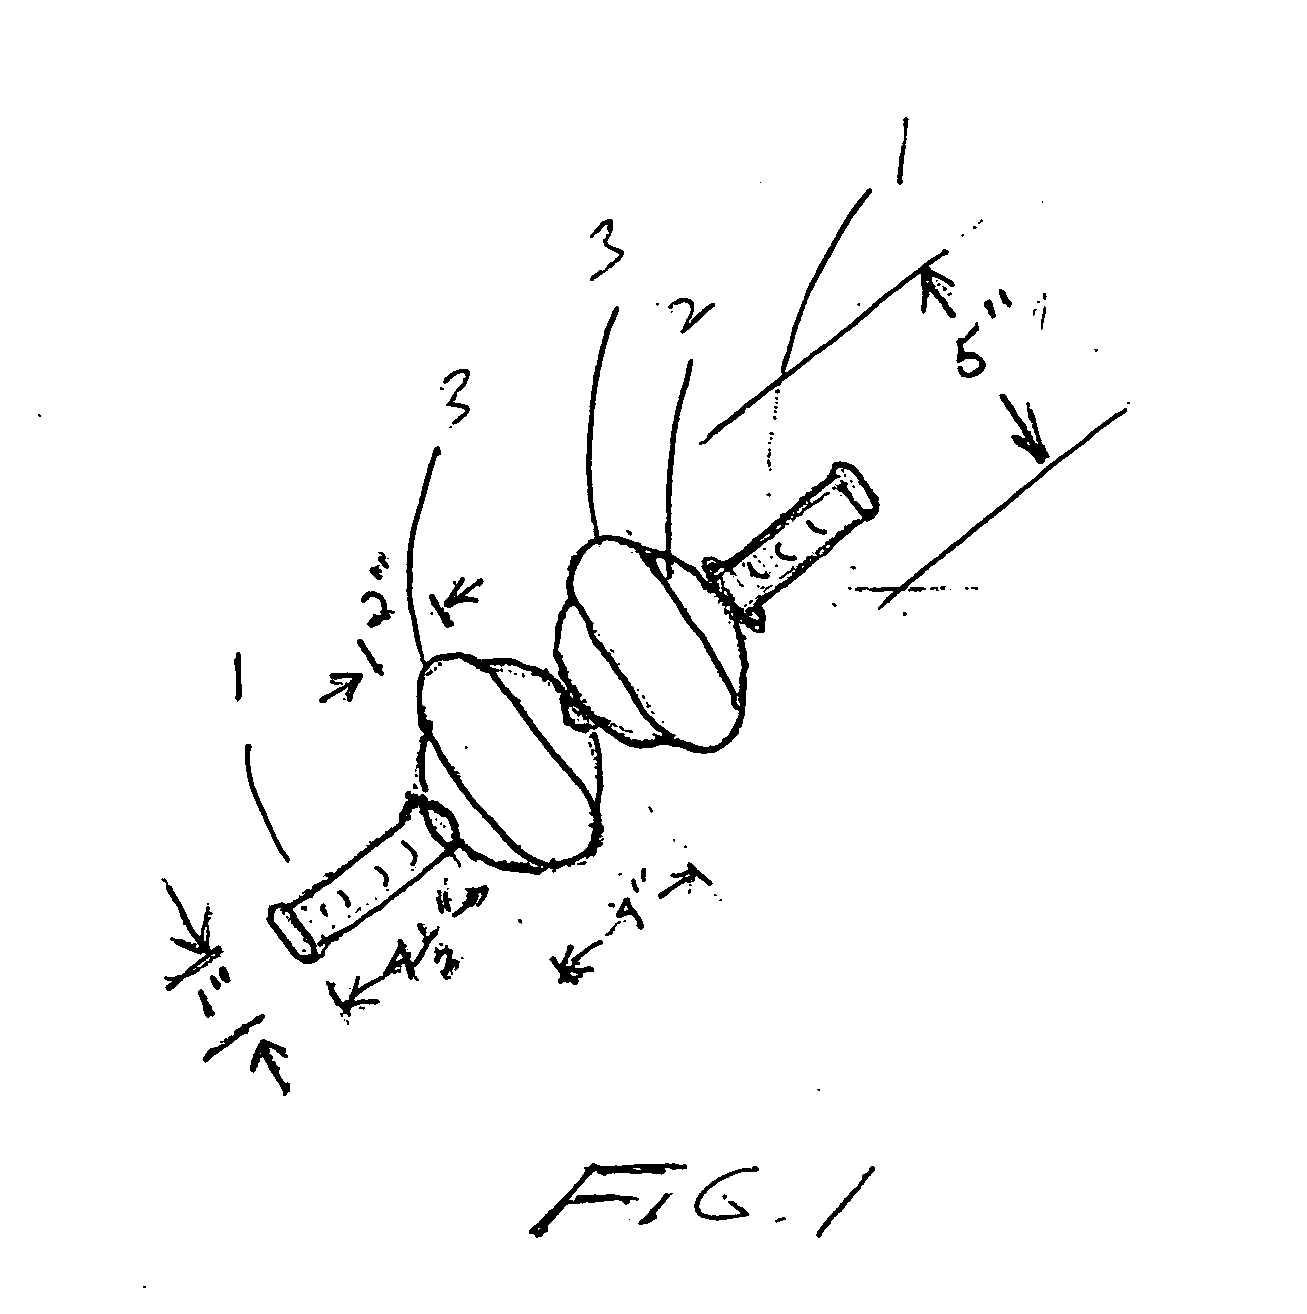 Exerciser and massager apparatus